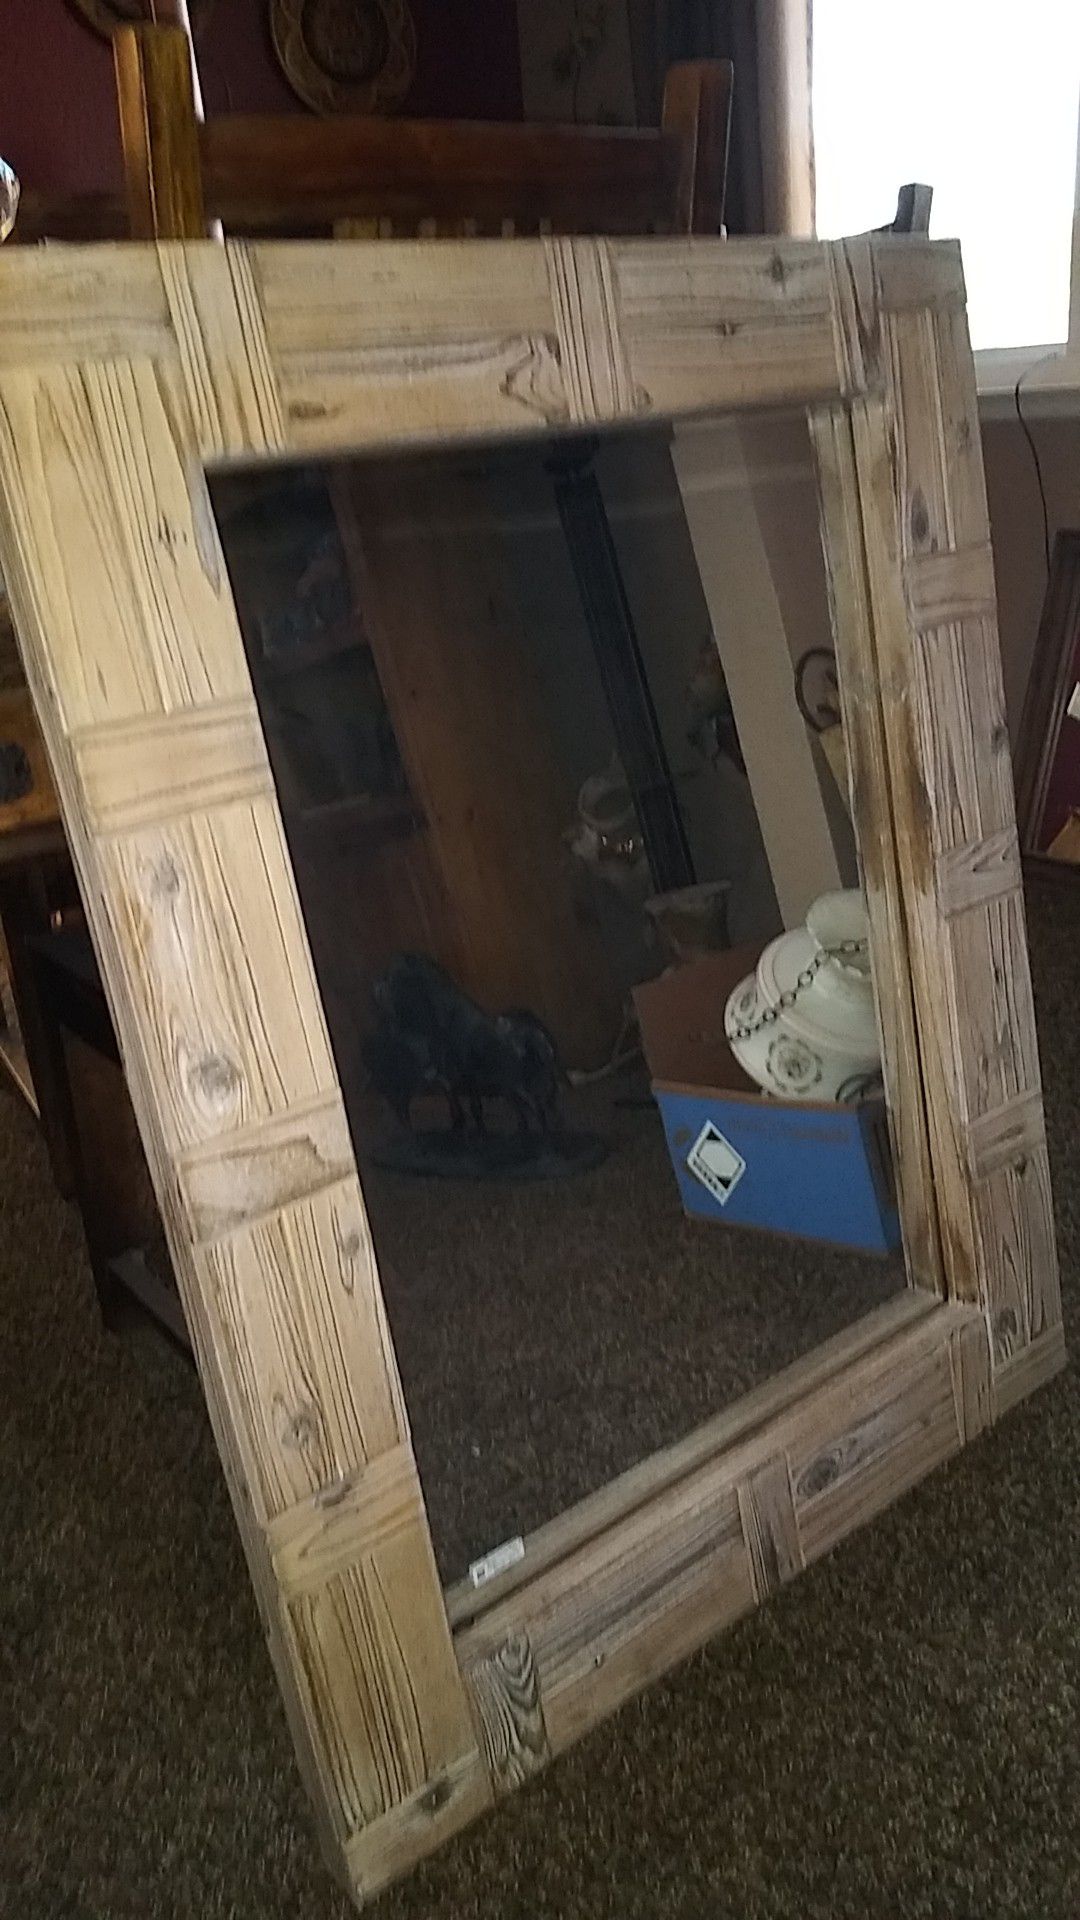 Large wall mirrori have 2..10 each..new never used..was for a bathroom remodel..